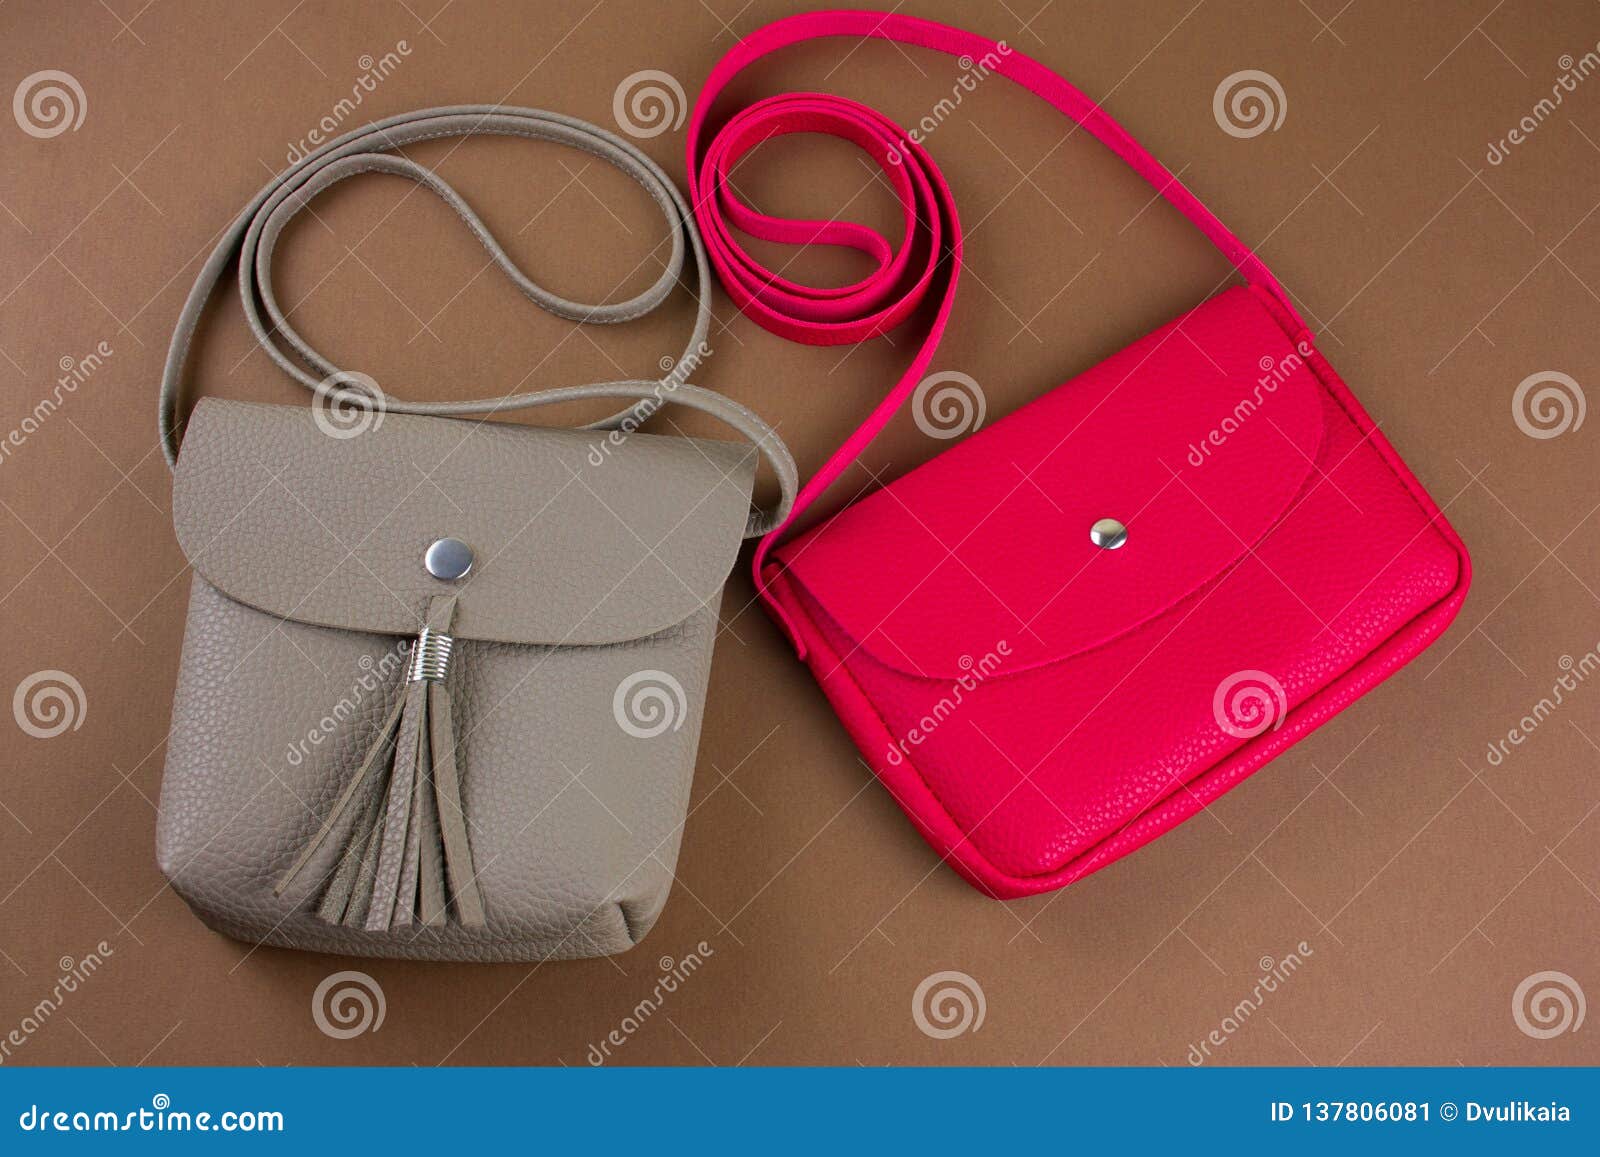 Red and beige leather bags stock image. Image of clothing - 137806081